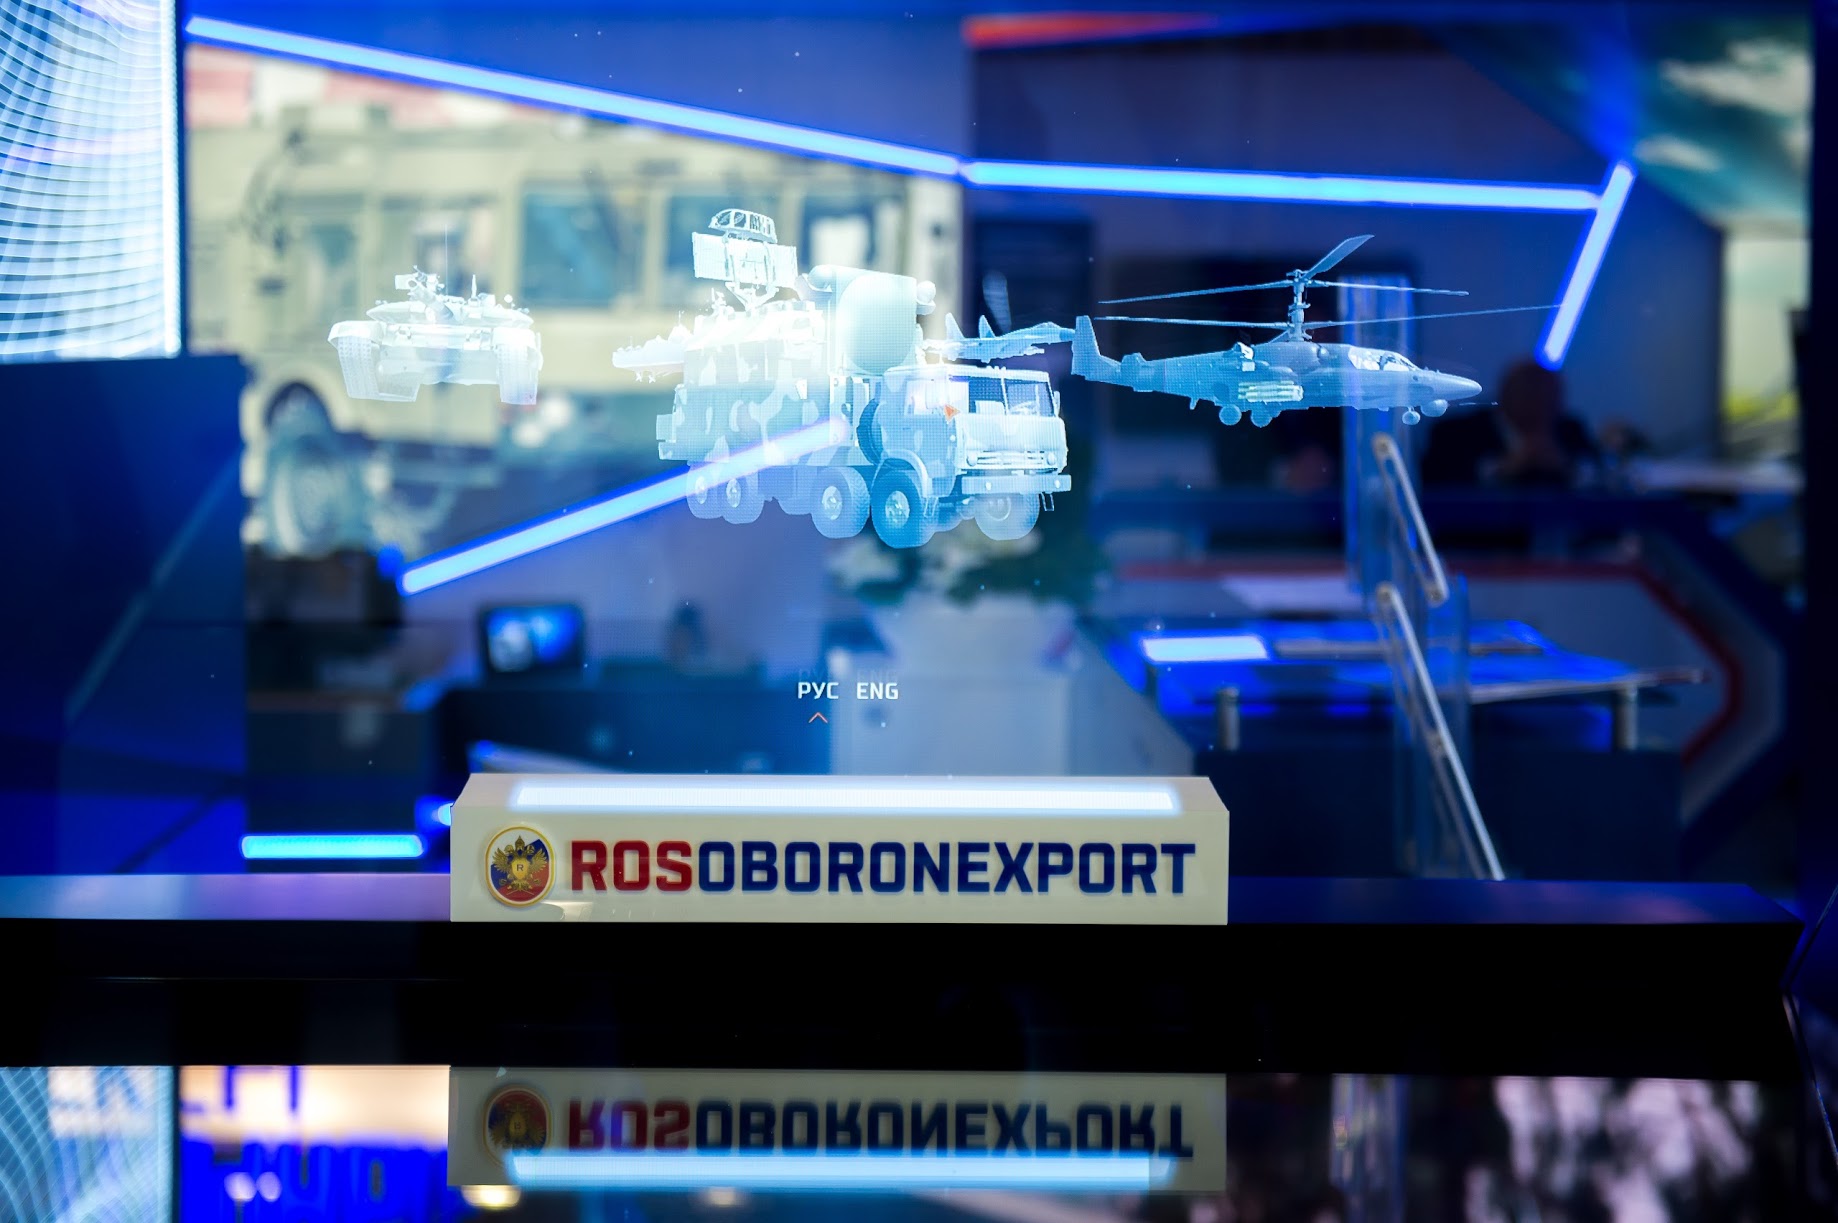 Rosoboronexport to Discuss the Status of Arms Exports With the Business Community at SPIEF 2019